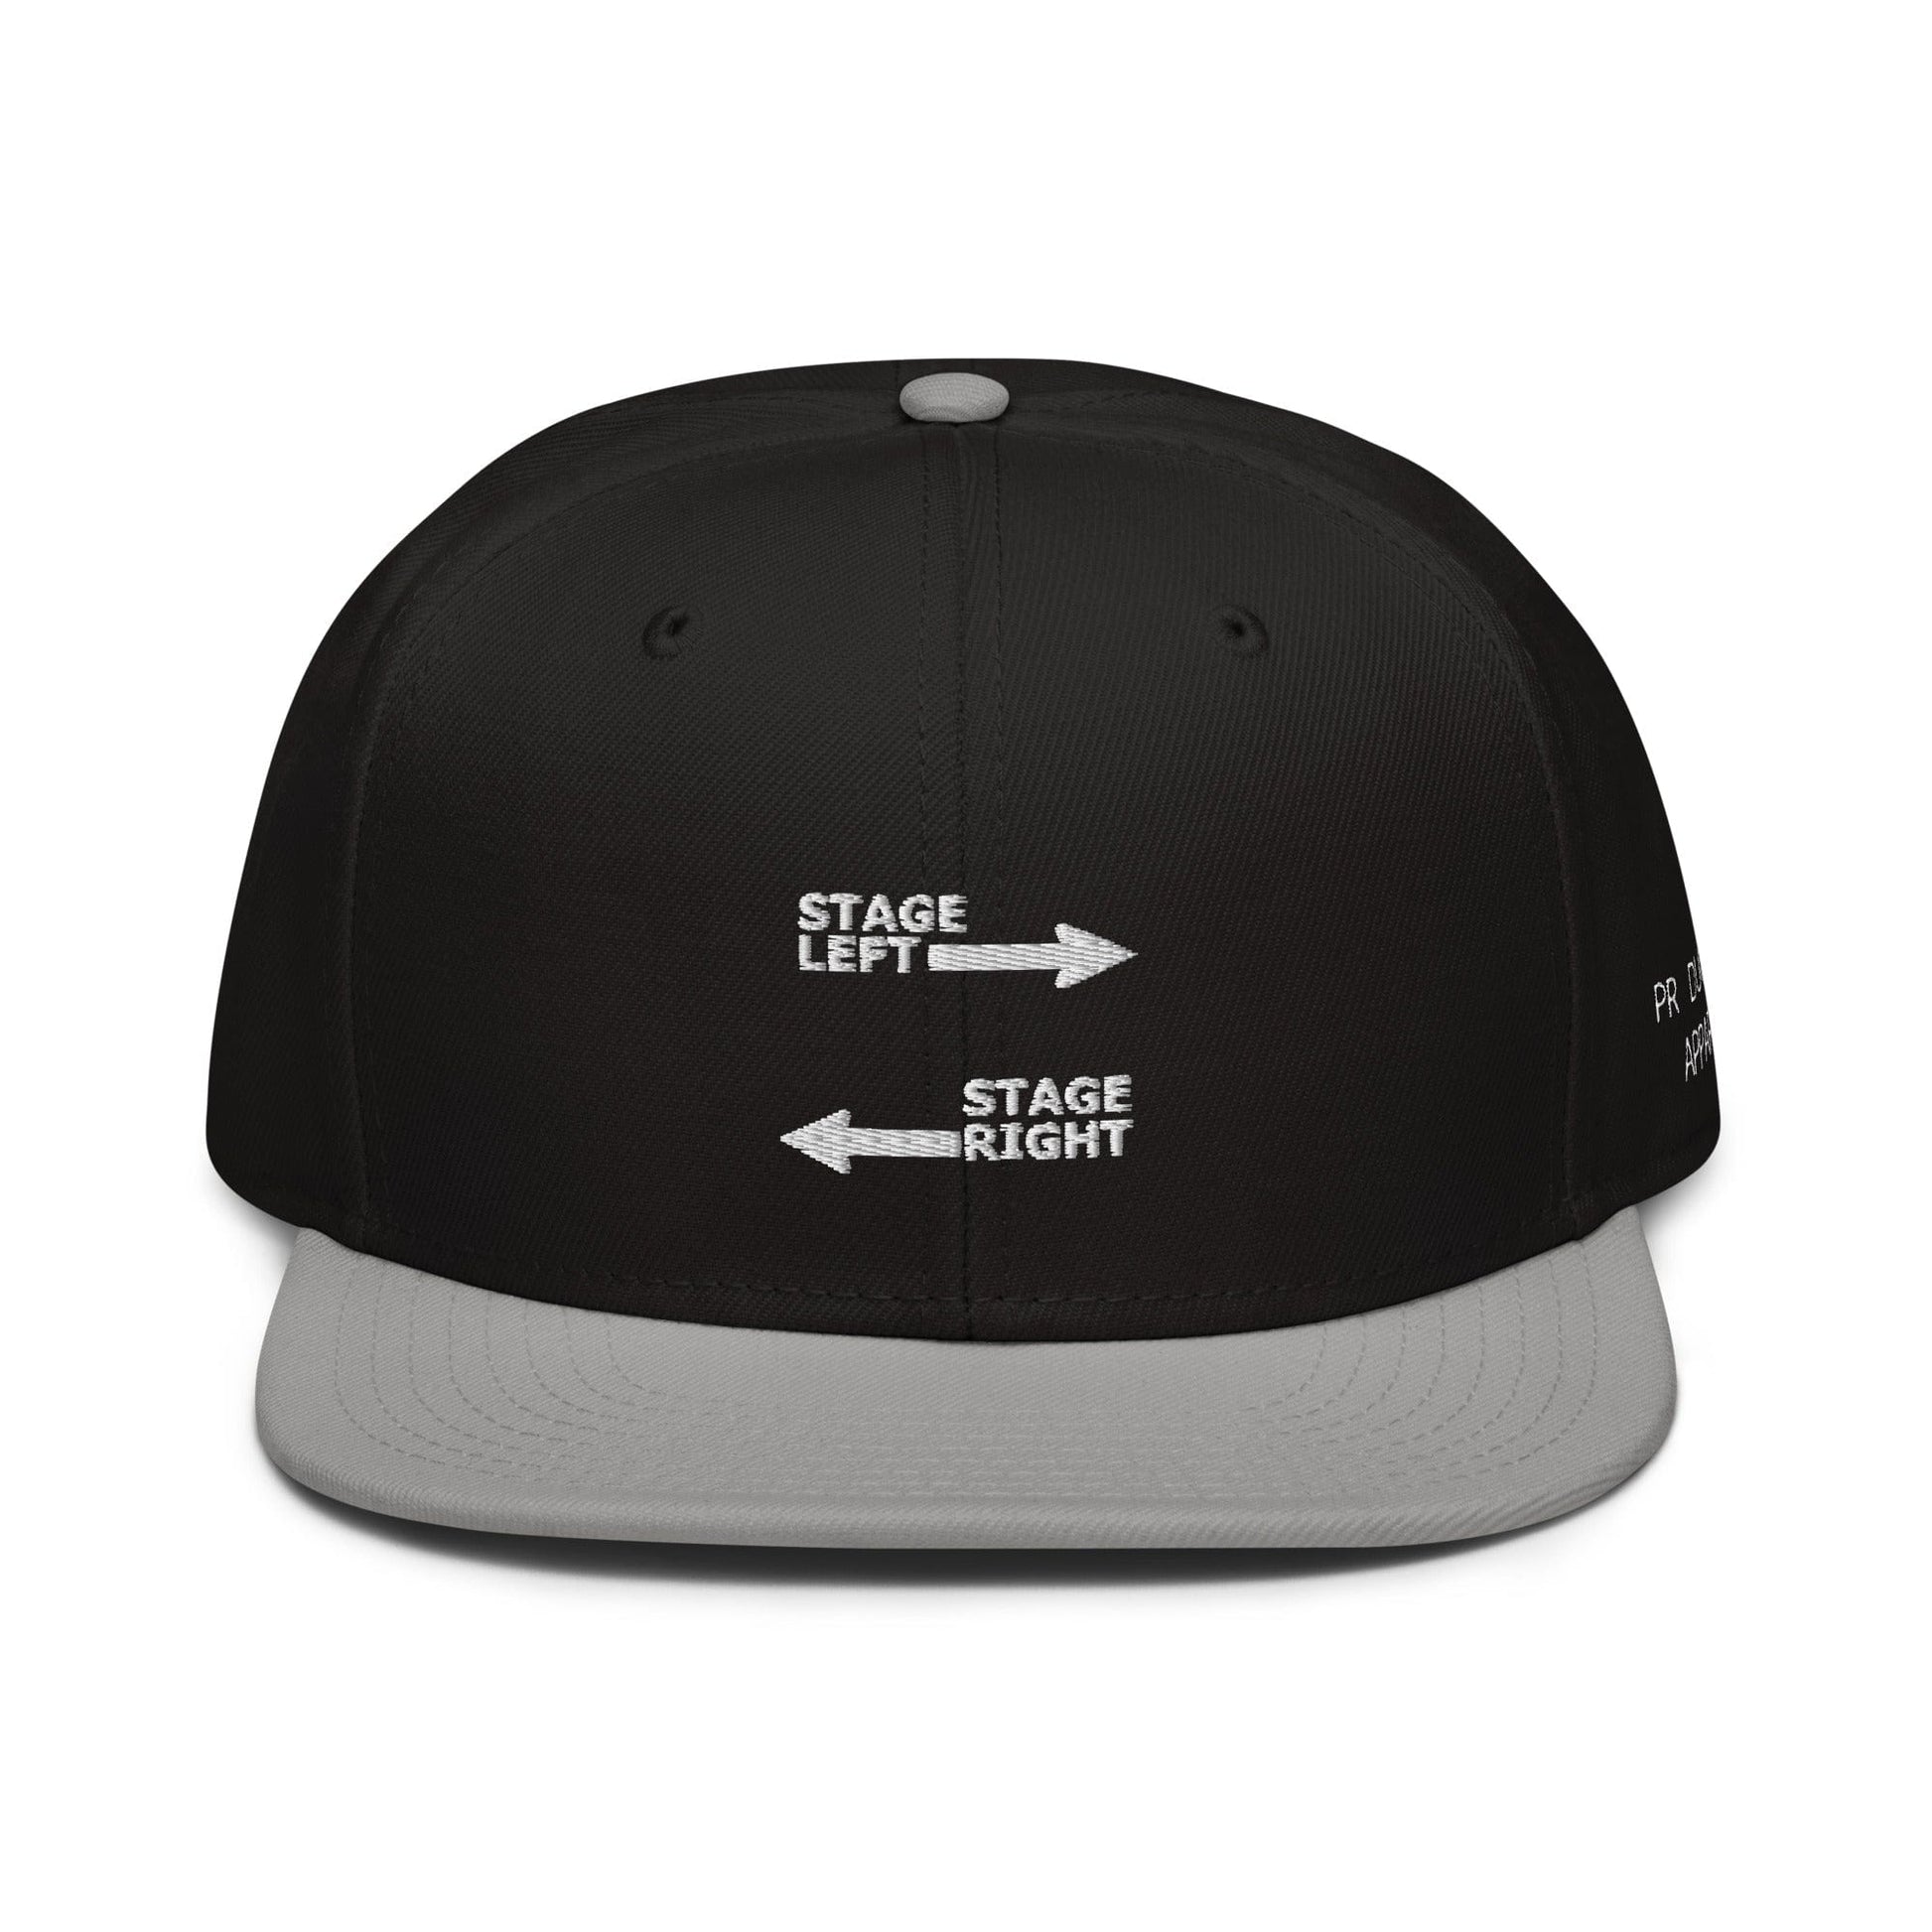 Production Apparel Stage Left - Stage Right Hat Gray / Black / Black